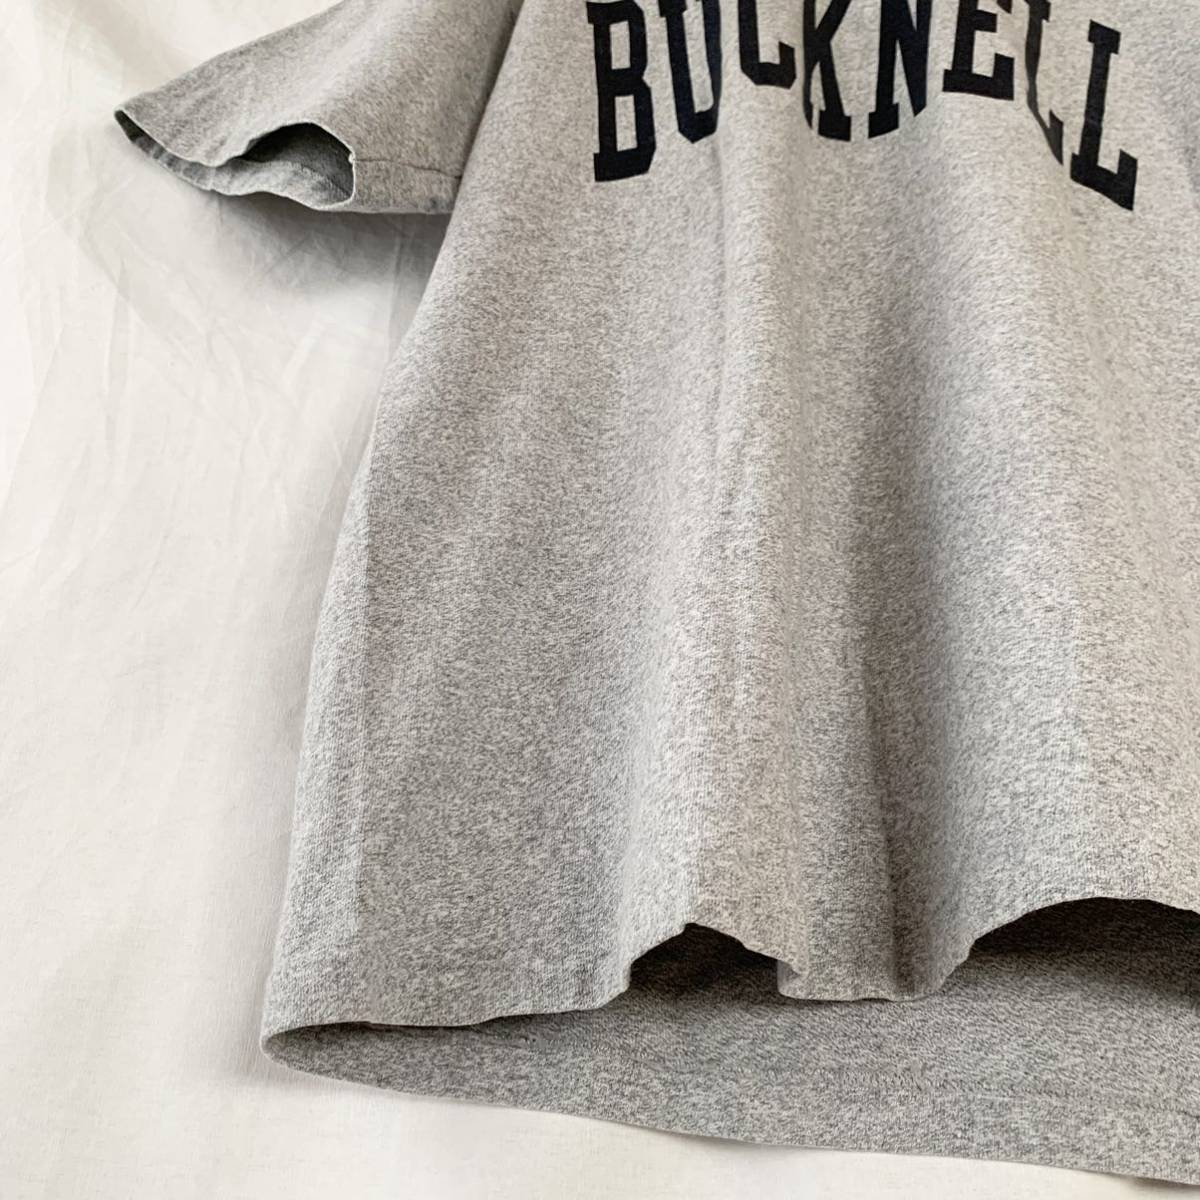 90s USA製 The Cotton Exchange BUCKNELL BISON バックネル大学 両面プリント デカロゴ カレッジ Tシャツ L ヴィンテージ 杢グレーの画像6